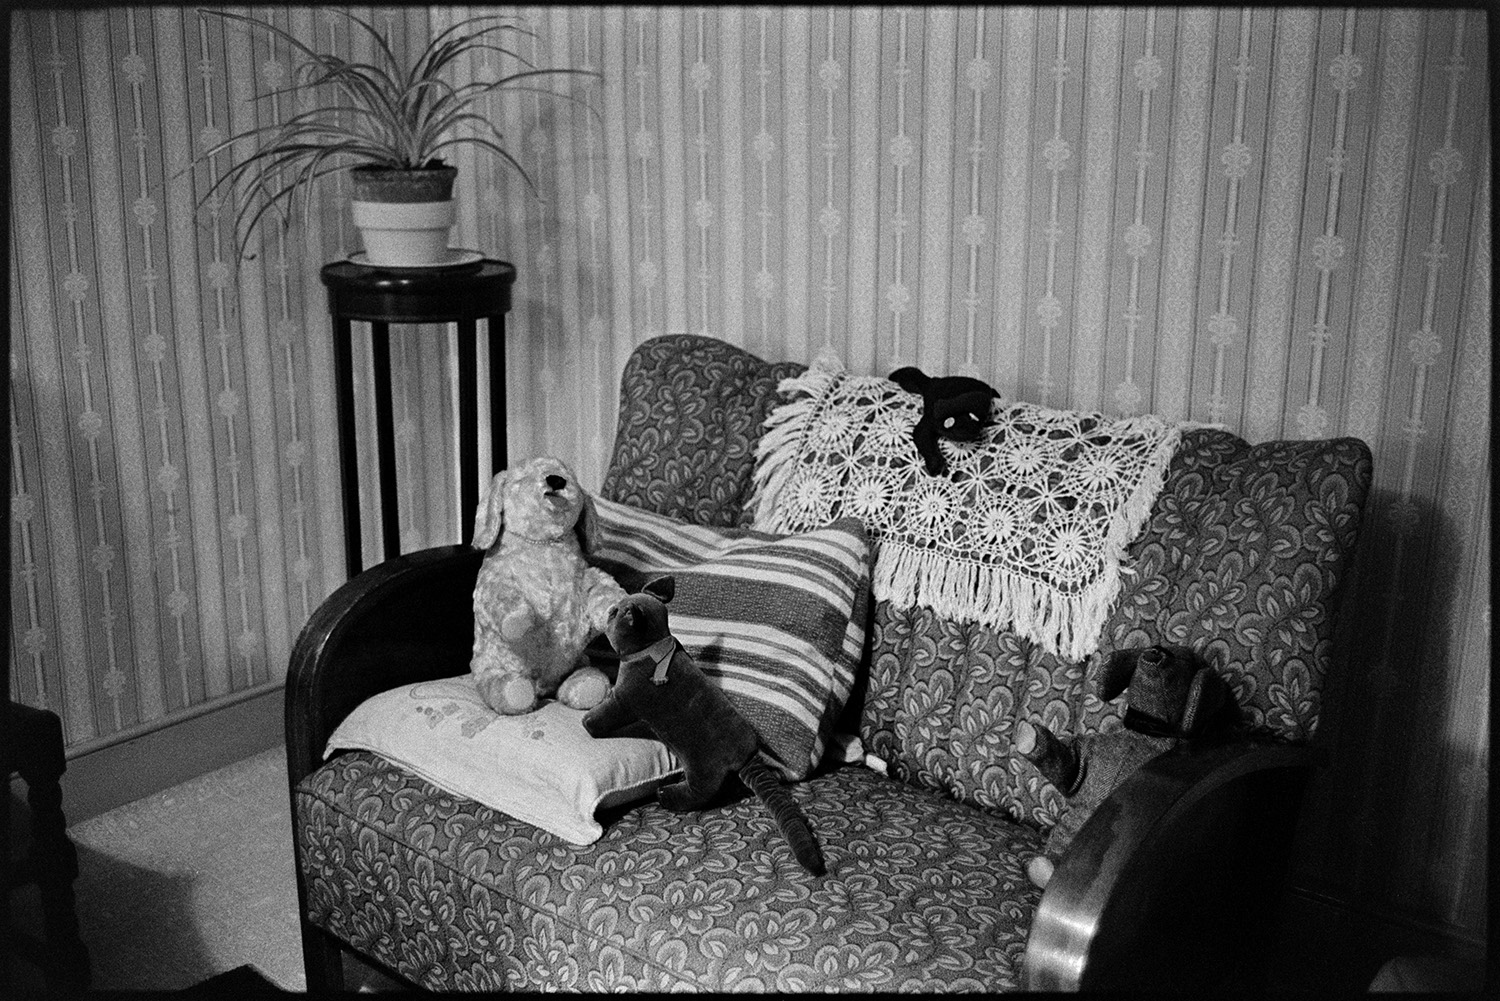 Sofa, cushions and stuffed toys. 
[Interior of a living room, possibly Emily Easterbrook's home, in West Lane, Dolton. A sofa with cushion and stuffed toys, and a pot plant on a stand can be seen. The walls are covered with patterned wallpaper.]